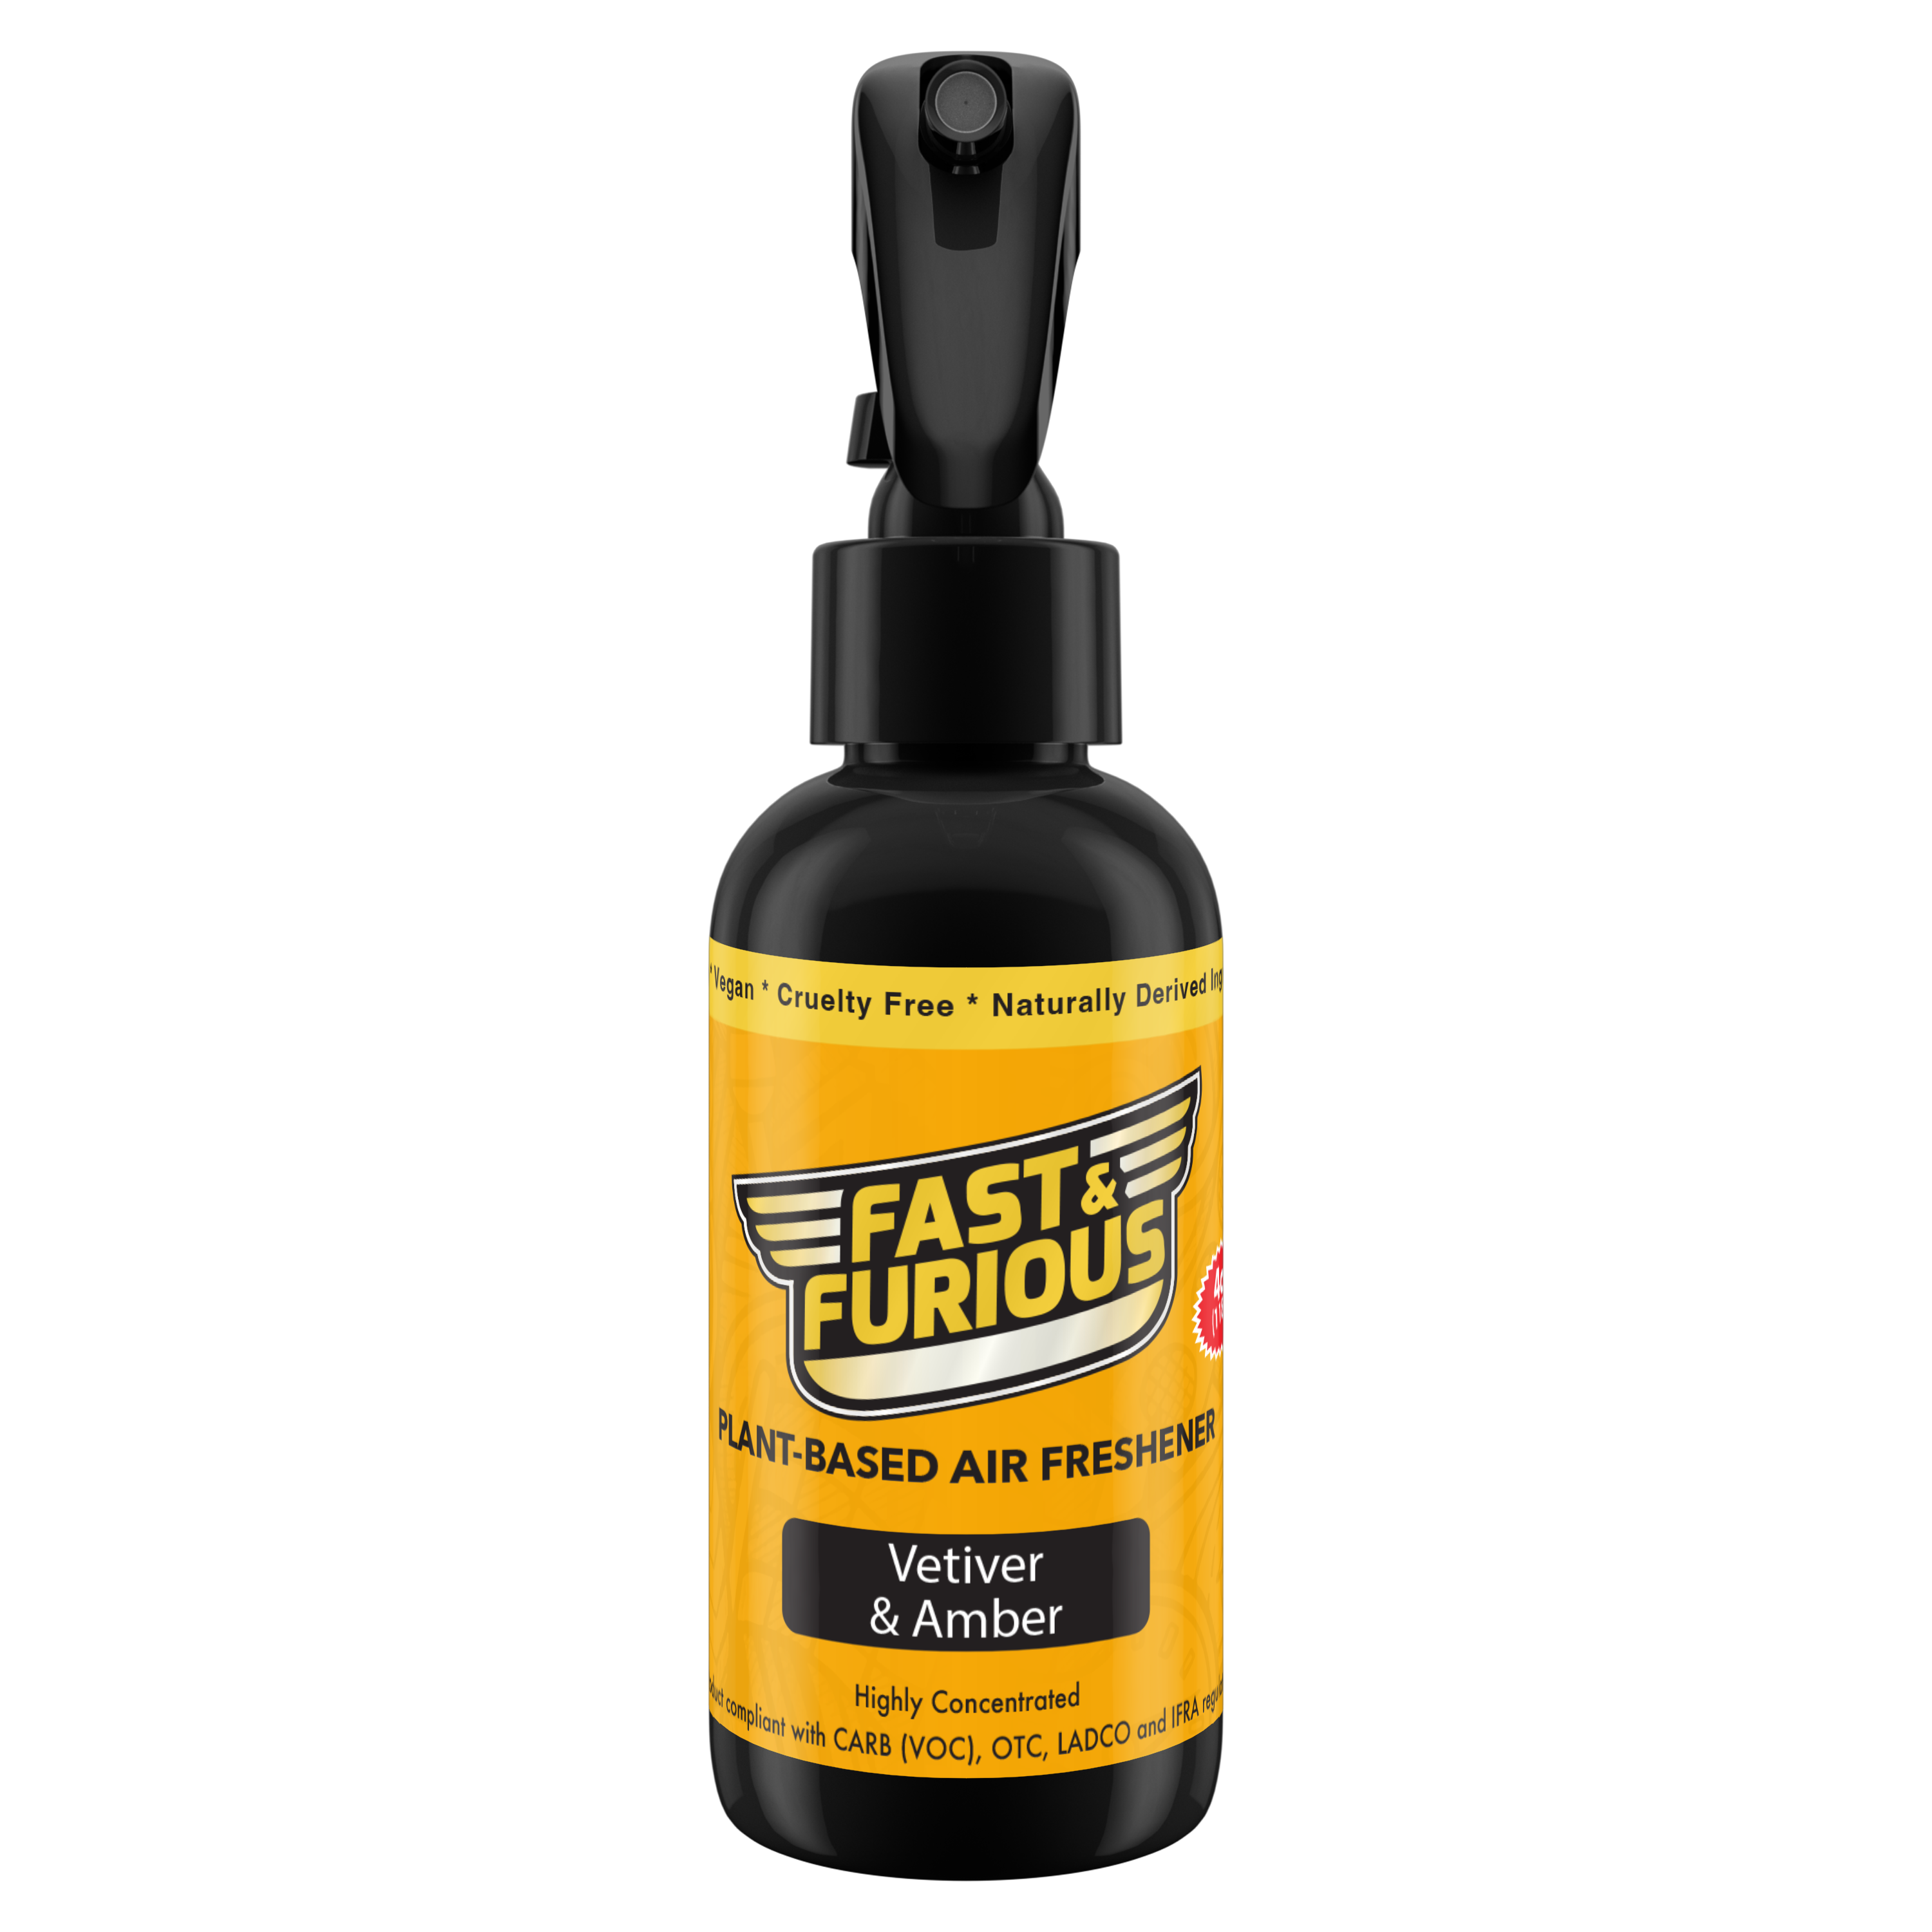 Fast and Furious Plant-Based Air Freshener - Vetiver & Amber Scent